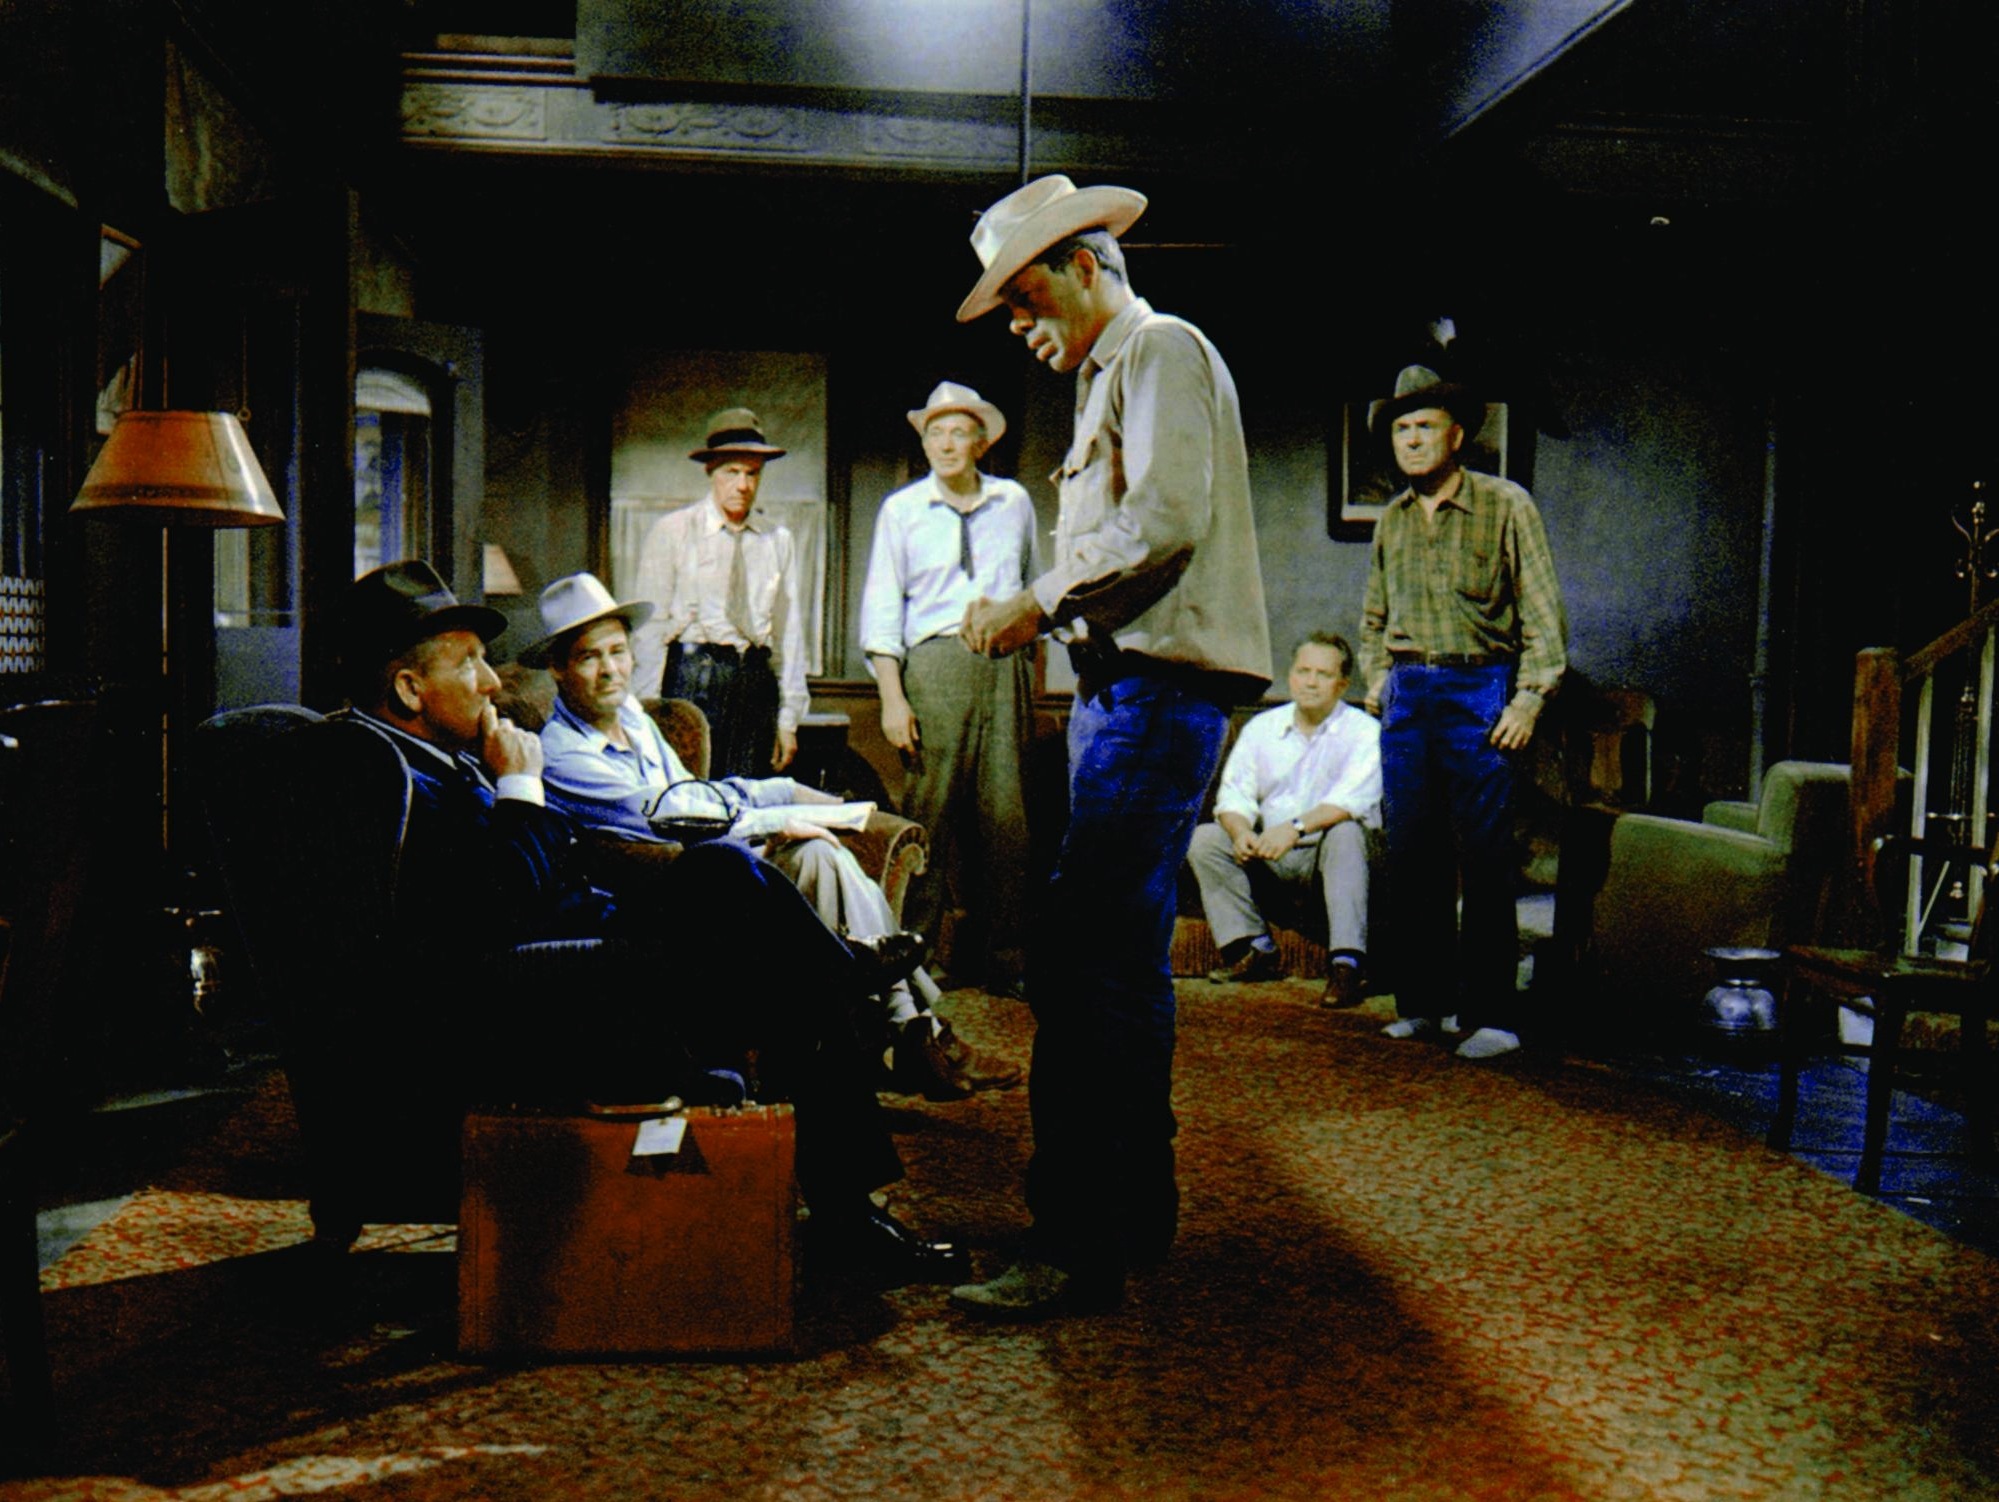 Spencer Tracy, Walter Brennan, Lee Marvin, Russell Collins, Dean Jagger, Robert Ryan, and Walter Sande in Bad Day at Black Rock (1955)